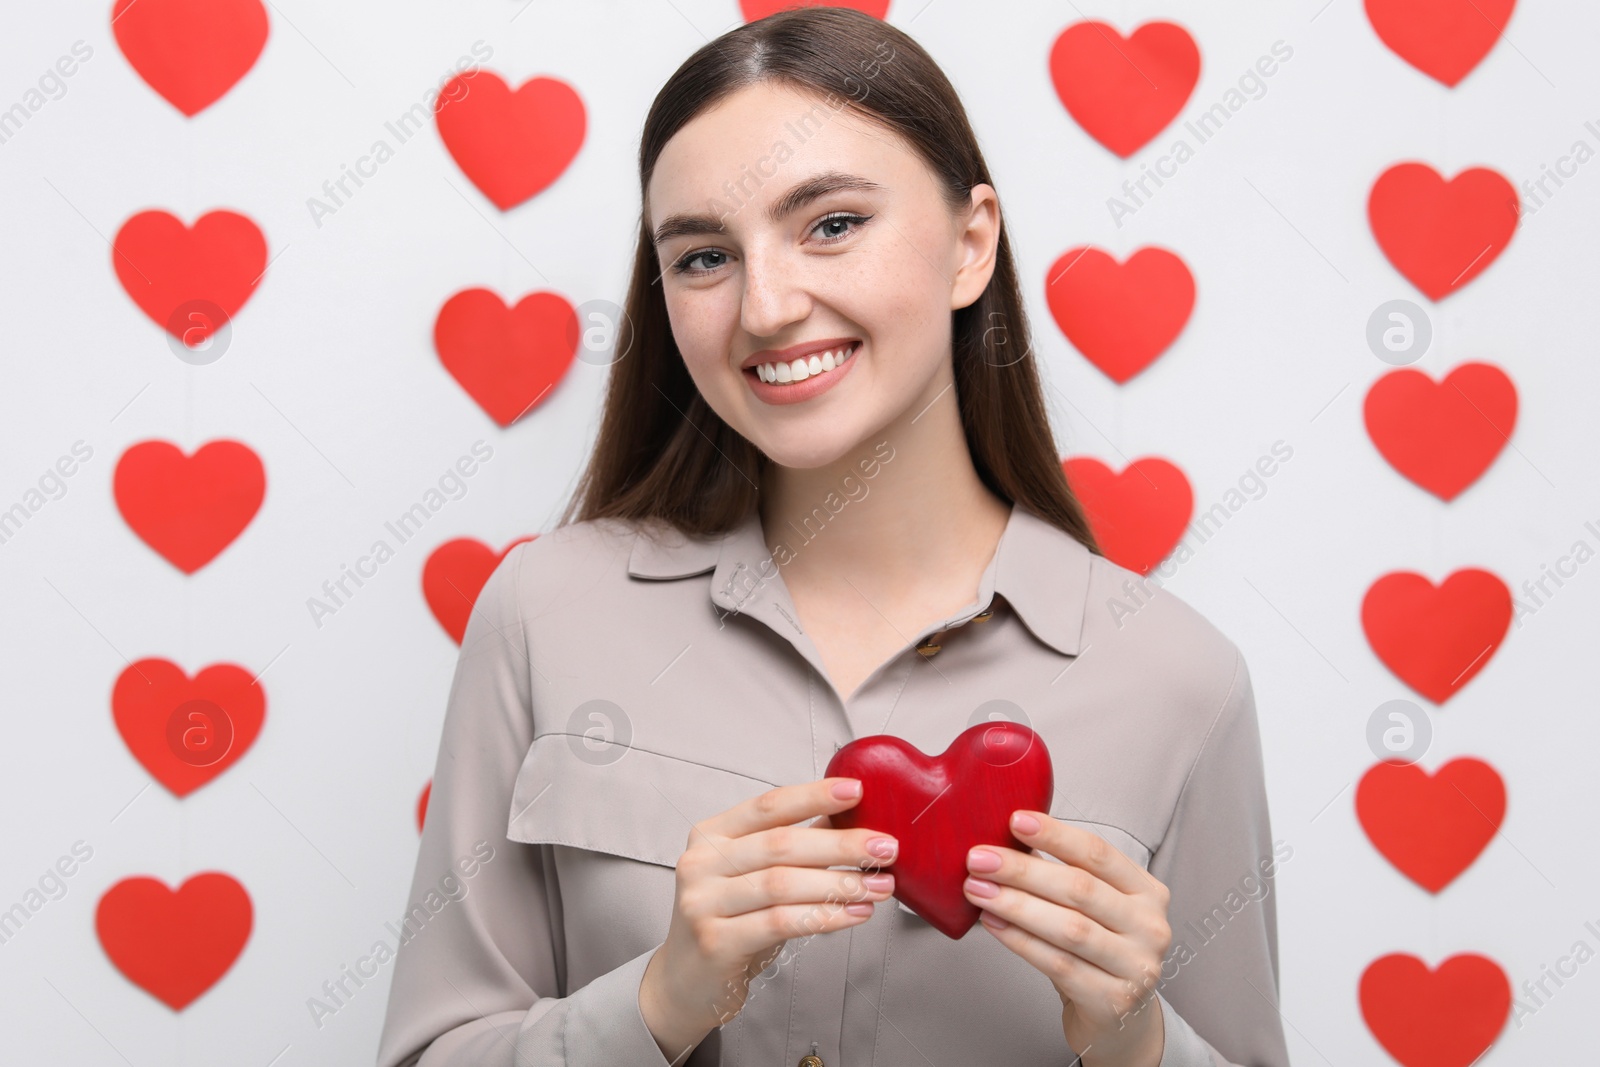 Photo of Smiling woman holding red heart on decorated background